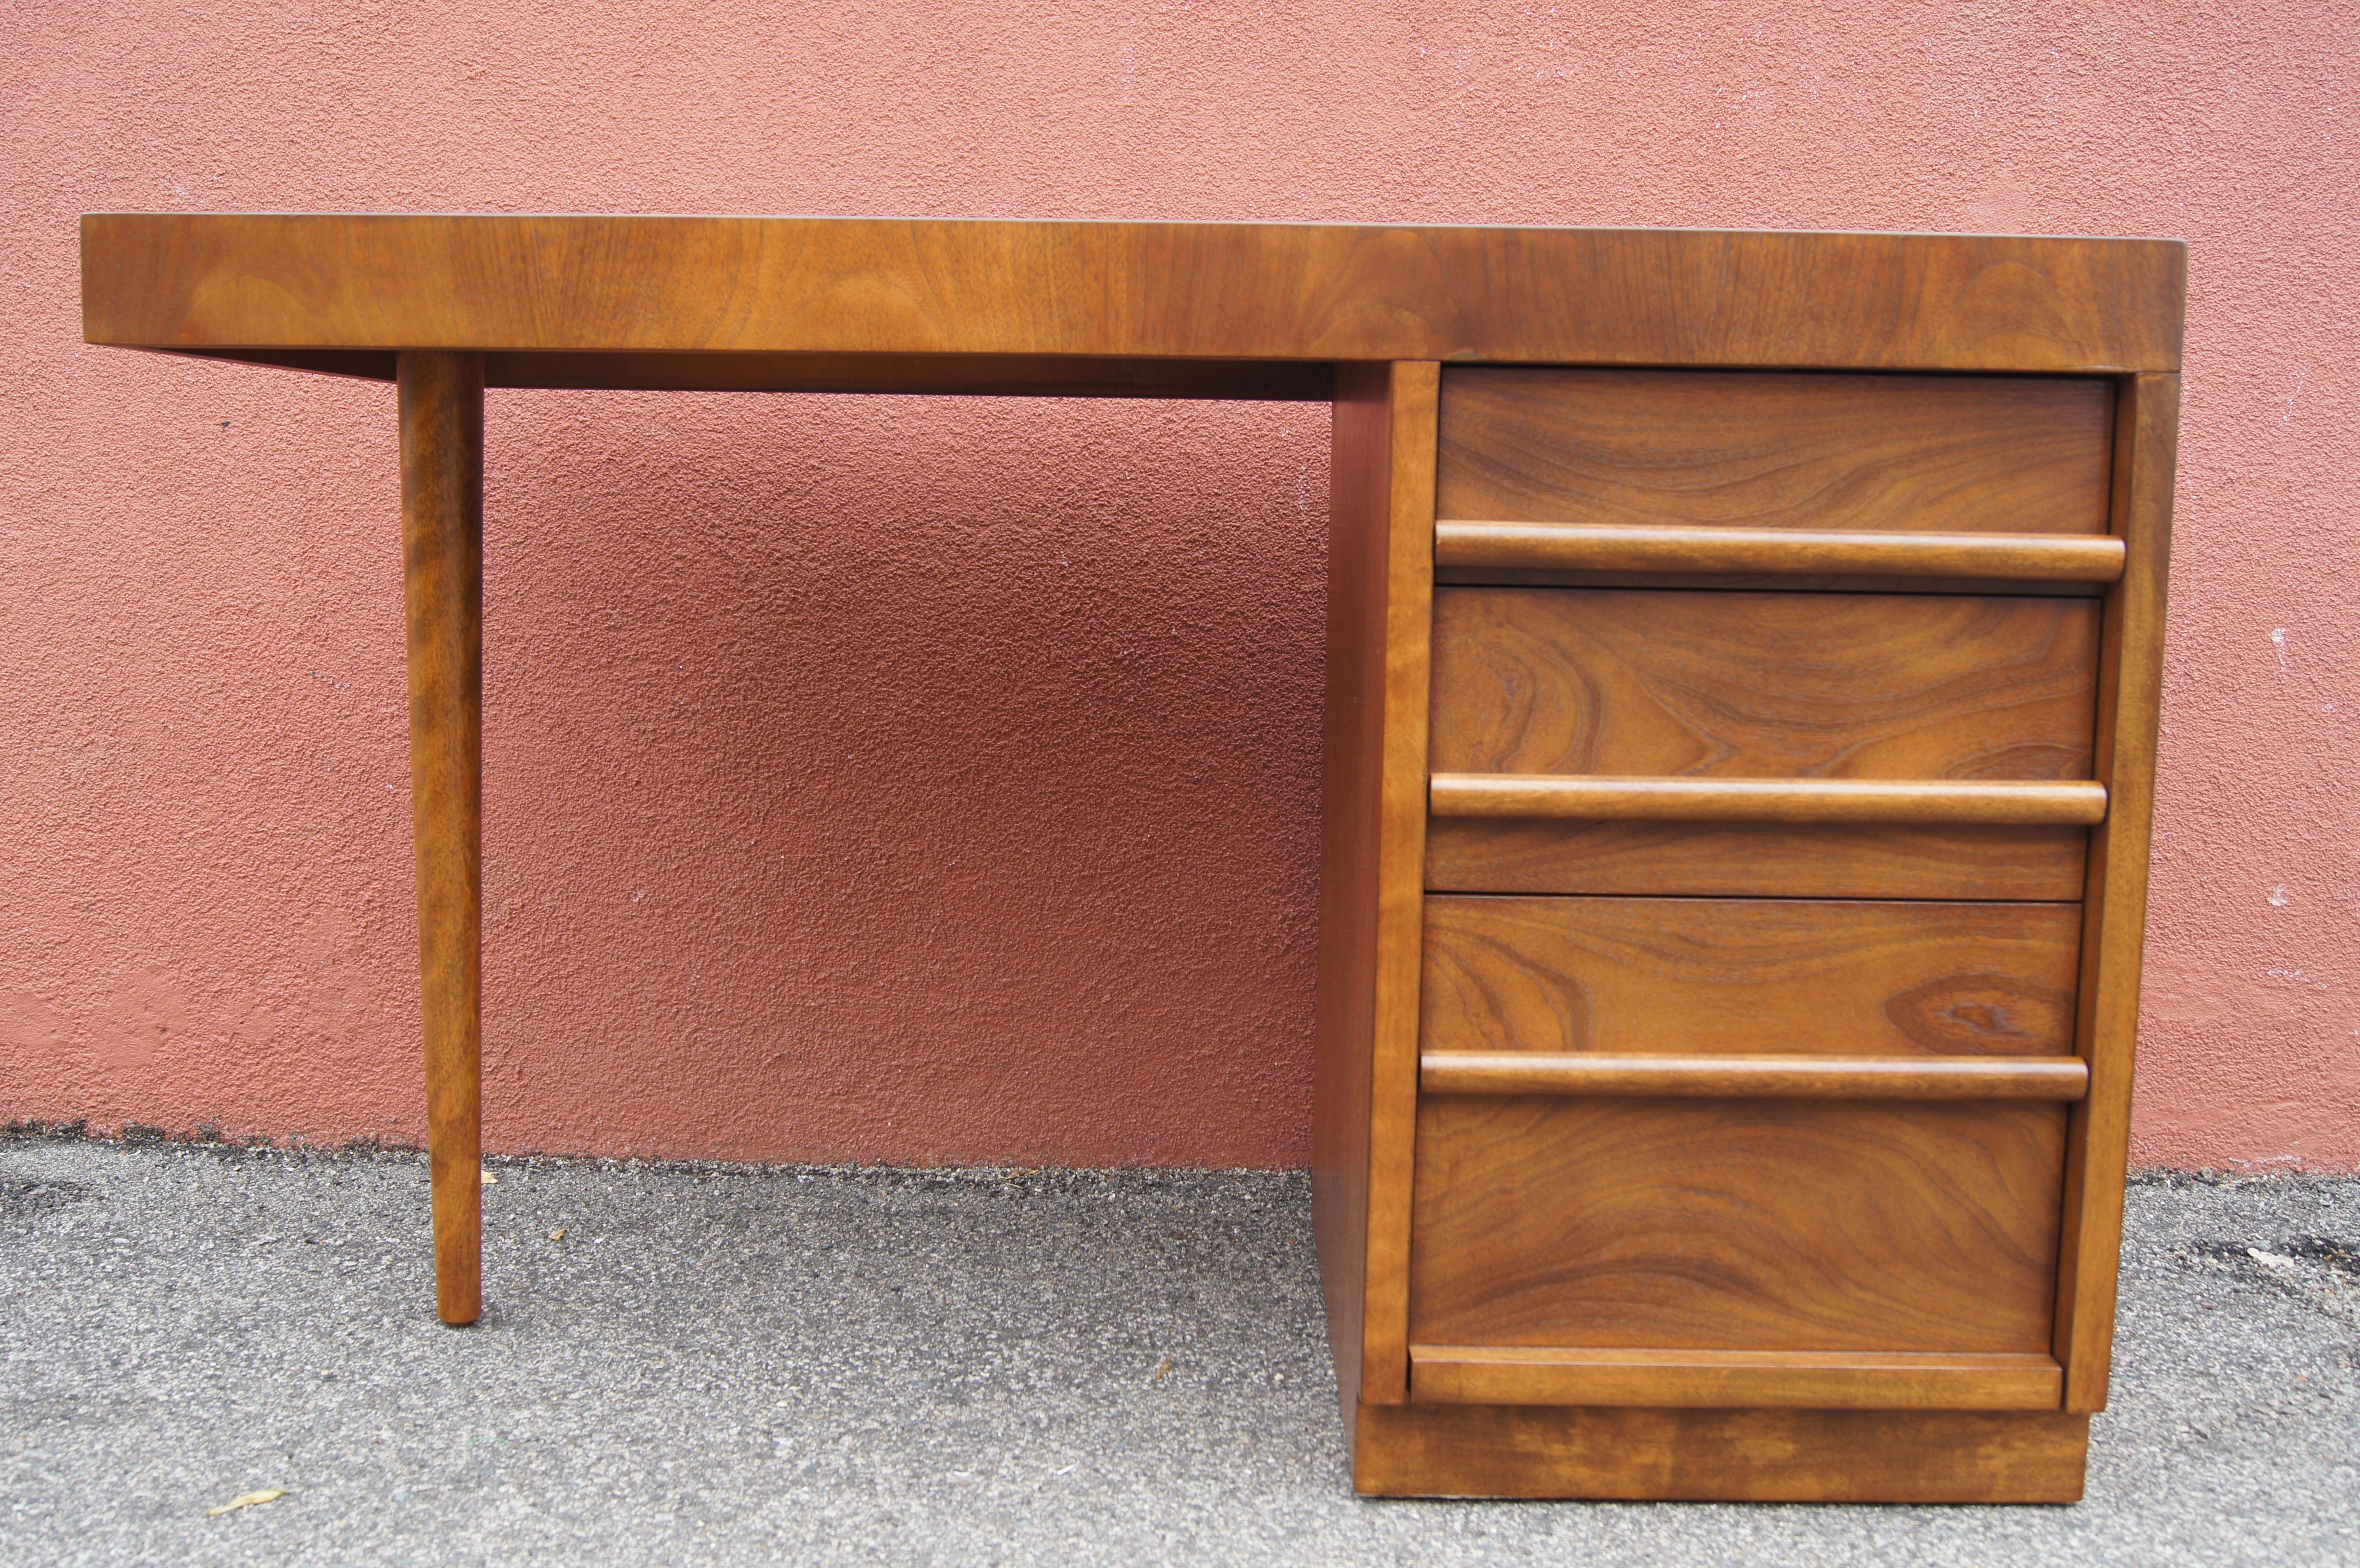 T.H. Robsjohn-Gibbings designed this walnut desk for Widdicomb. A stack of three drawers is balanced by a thick top and a single tapering leg. The divided drawers, the lowest of which is file deep, feature solid rounded pulls. The back of the desk